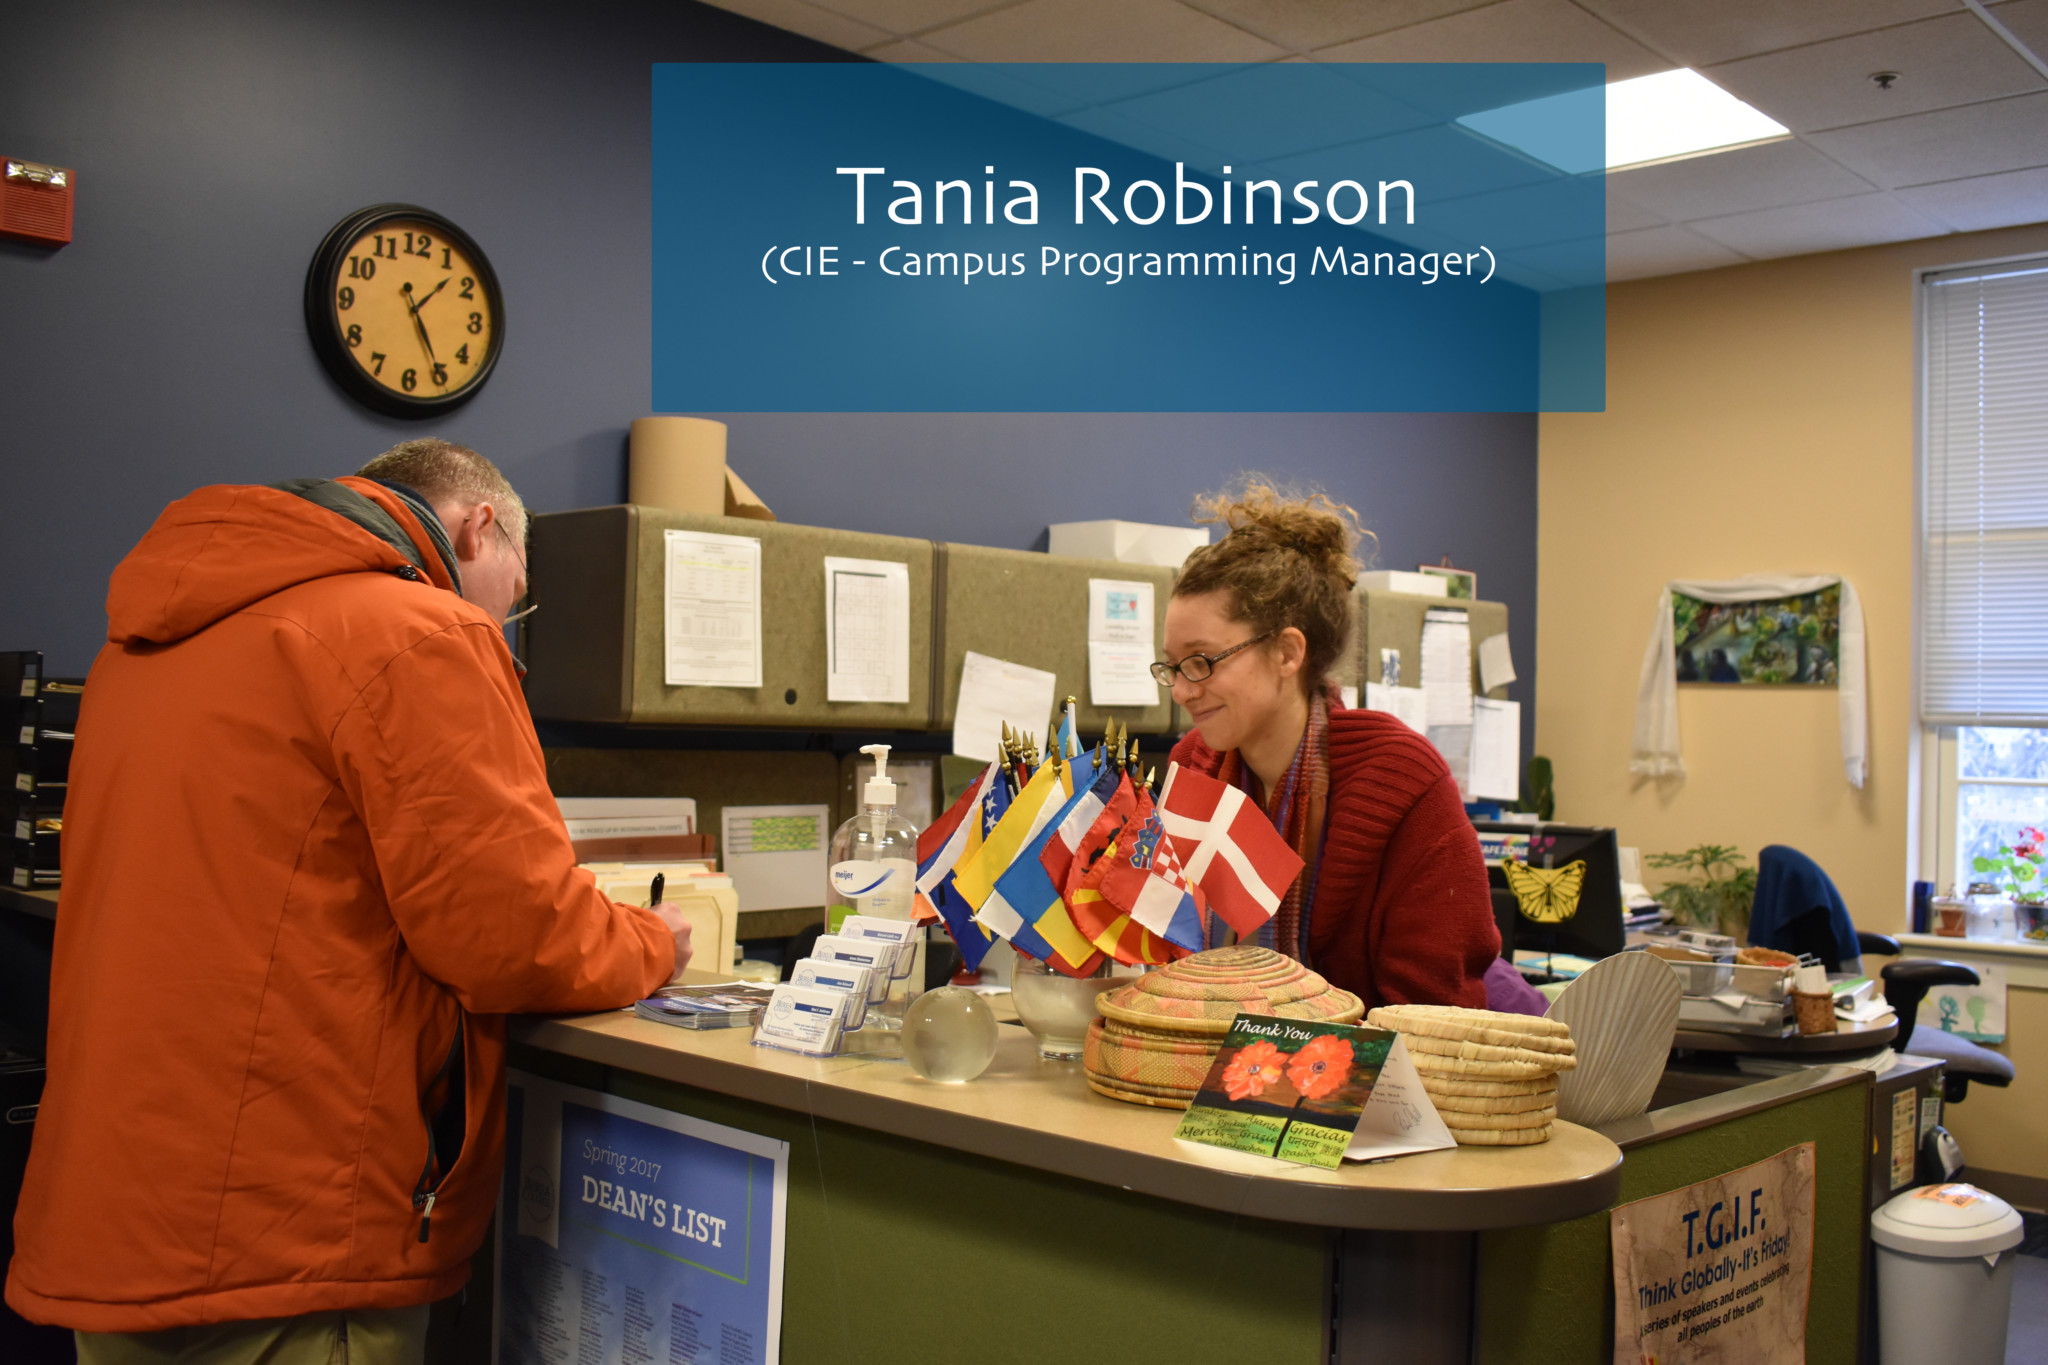 Tania helps with Passport Application processes